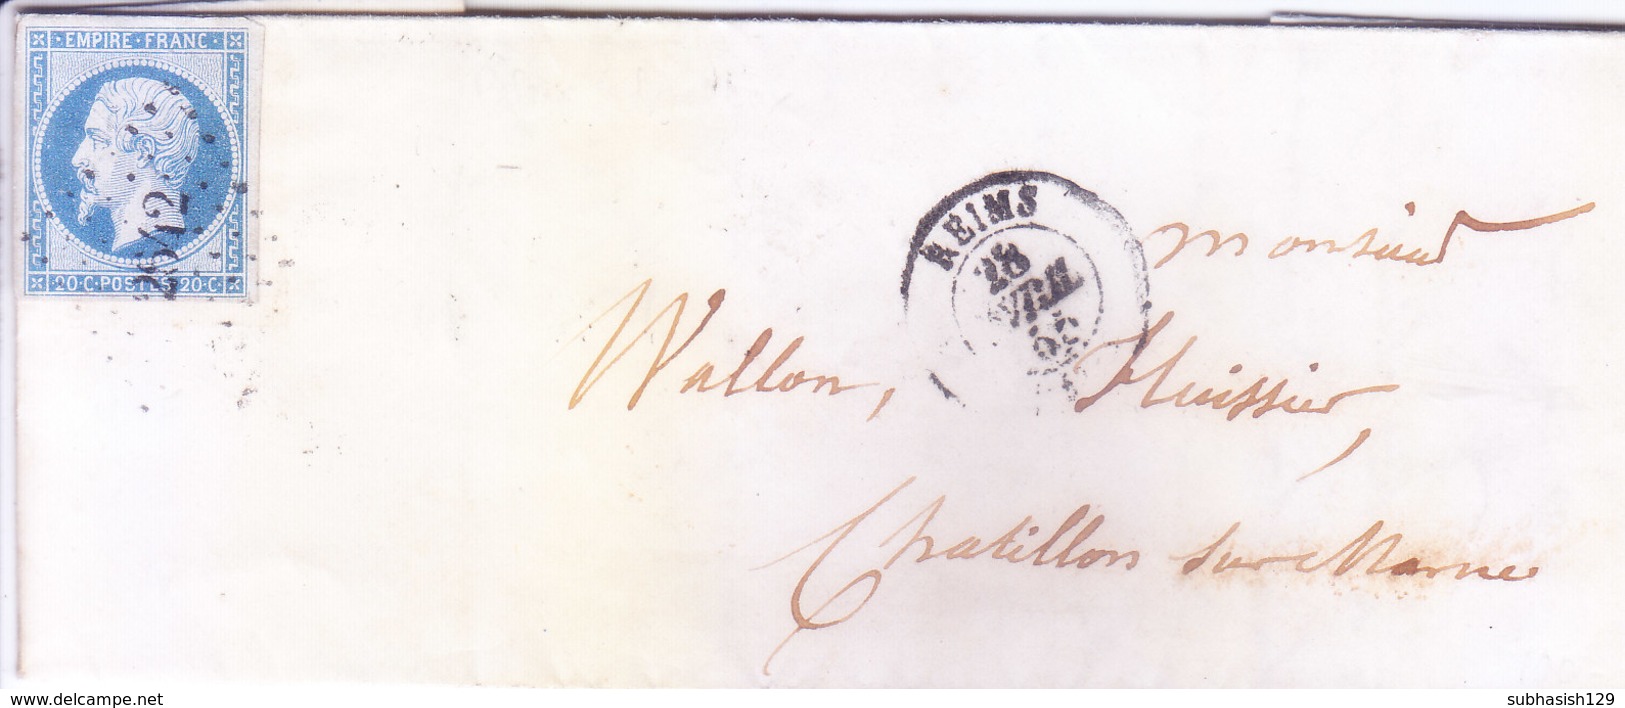 FRANCE : FOLDER LETTER WITH CONTENT : YEAR 1887 : DIAMOND DOT / GEM CANCELLATION : POSTED FROM REIMS - 1876-1898 Sage (Type II)